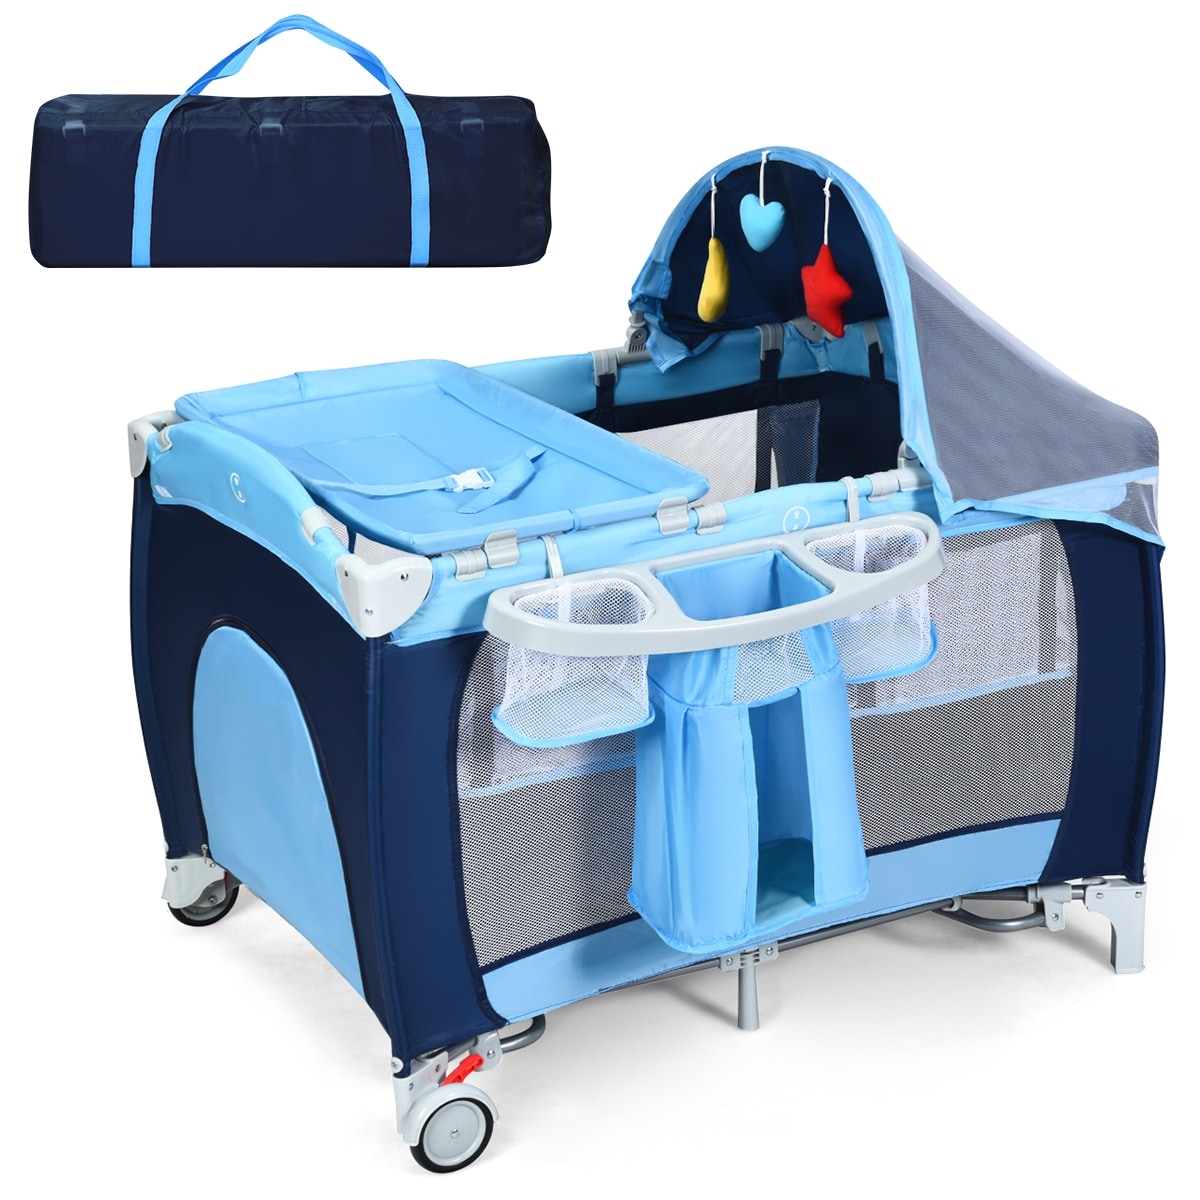 https://ak1.ostkcdn.com/images/products/is/images/direct/8c4c8e6787f9d0576d564a0e4822f76c552cf261/Costway-Foldable-Baby-Crib-Playpen-Travel-Infant-Bassinet-Bed-Mosquito-Net-Music-w-Bag.jpg